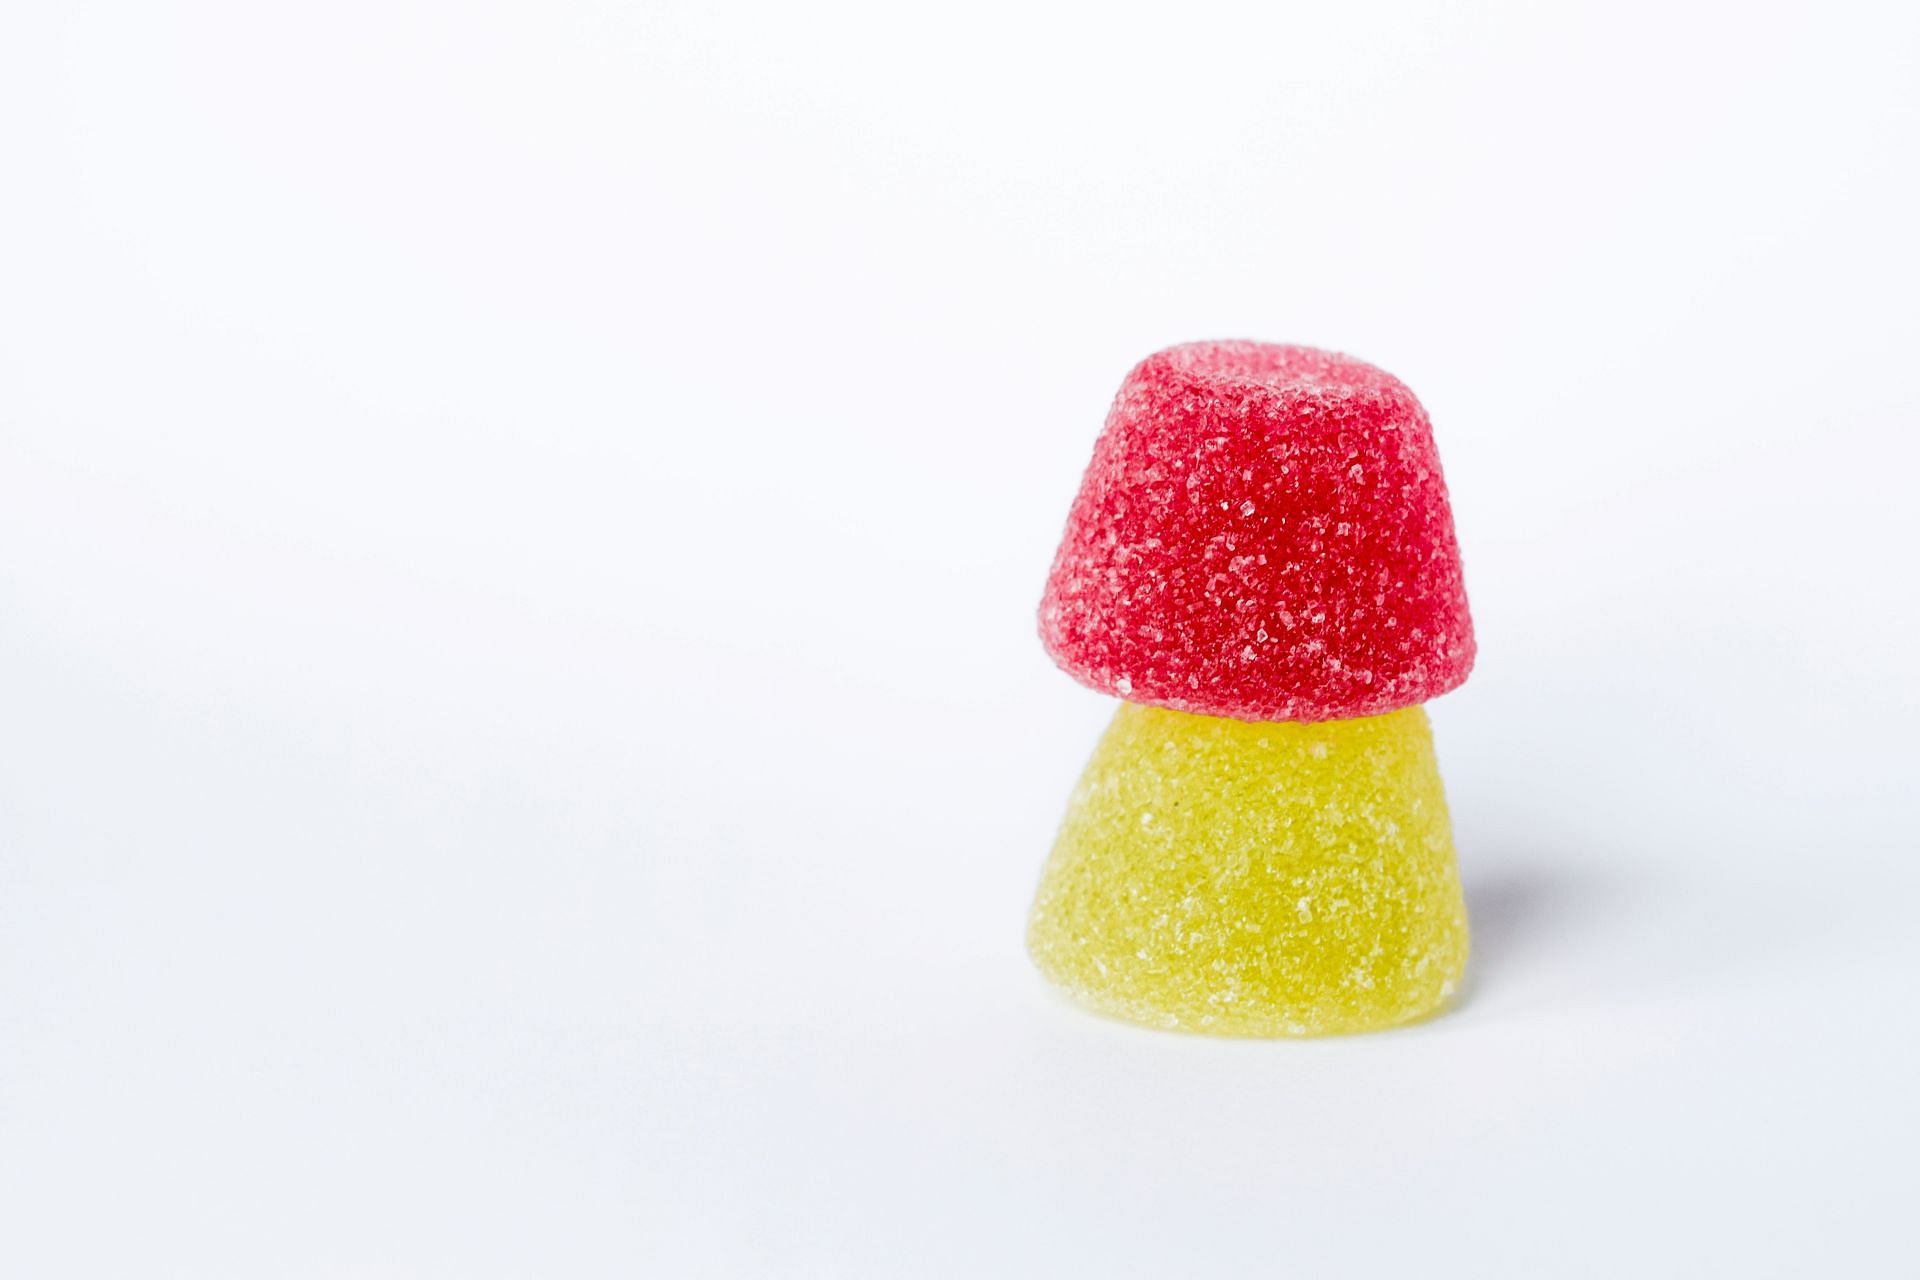 Mental health benefits when you stop eating sugar (image sourced via Pexels / Photo by arminas)